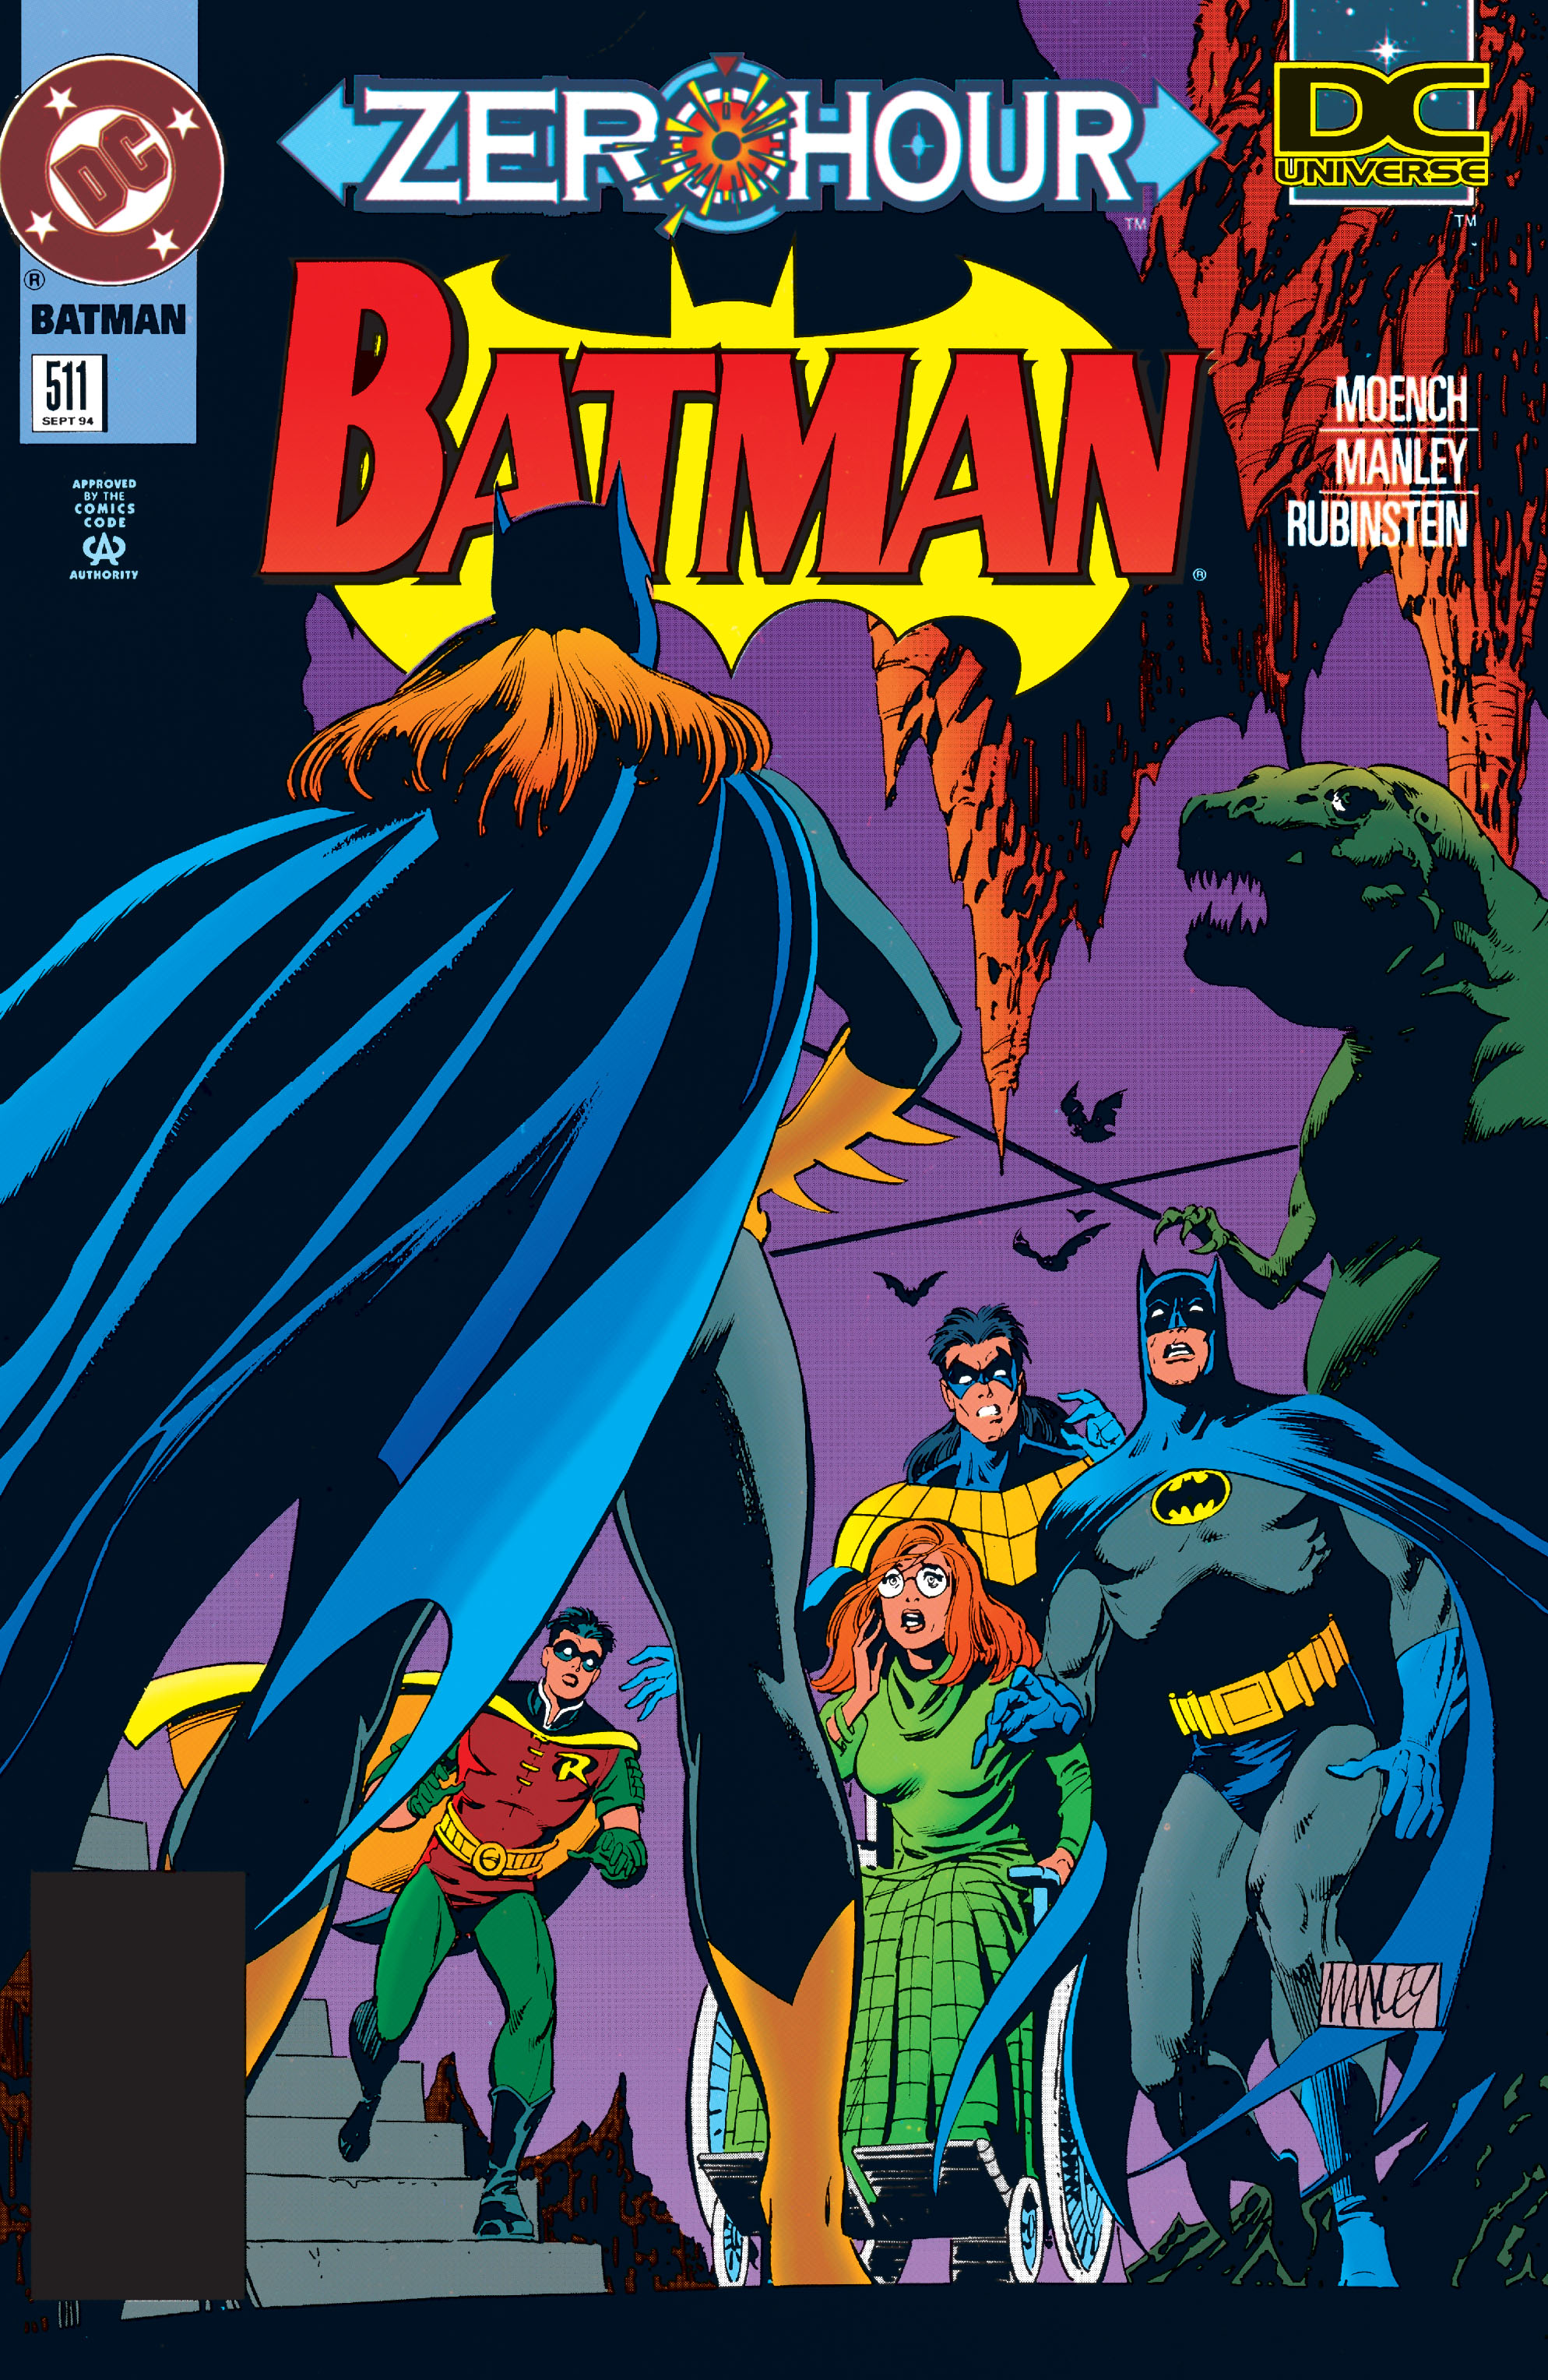 Batman 1940 Issue 511 | Read Batman 1940 Issue 511 comic online in high  quality. Read Full Comic online for free - Read comics online in high  quality .|